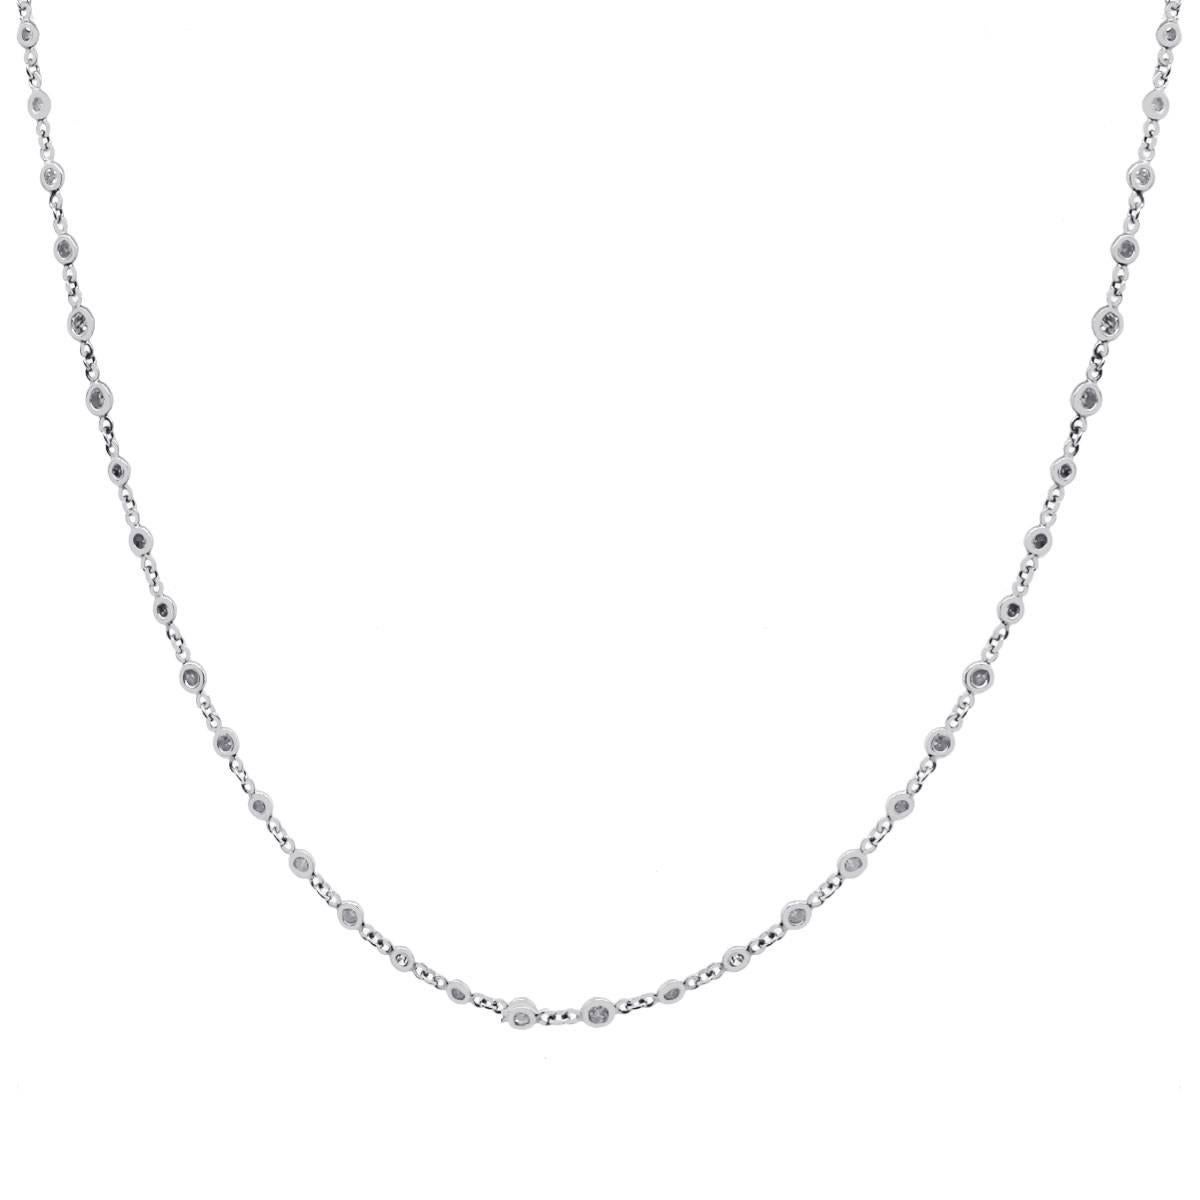 Material: Platinum
Diamond Details: Approximately 2.64ctw round brilliant diamonds. Diamonds are G/H in color and SI in clarity.
Necklace Measurements: 16